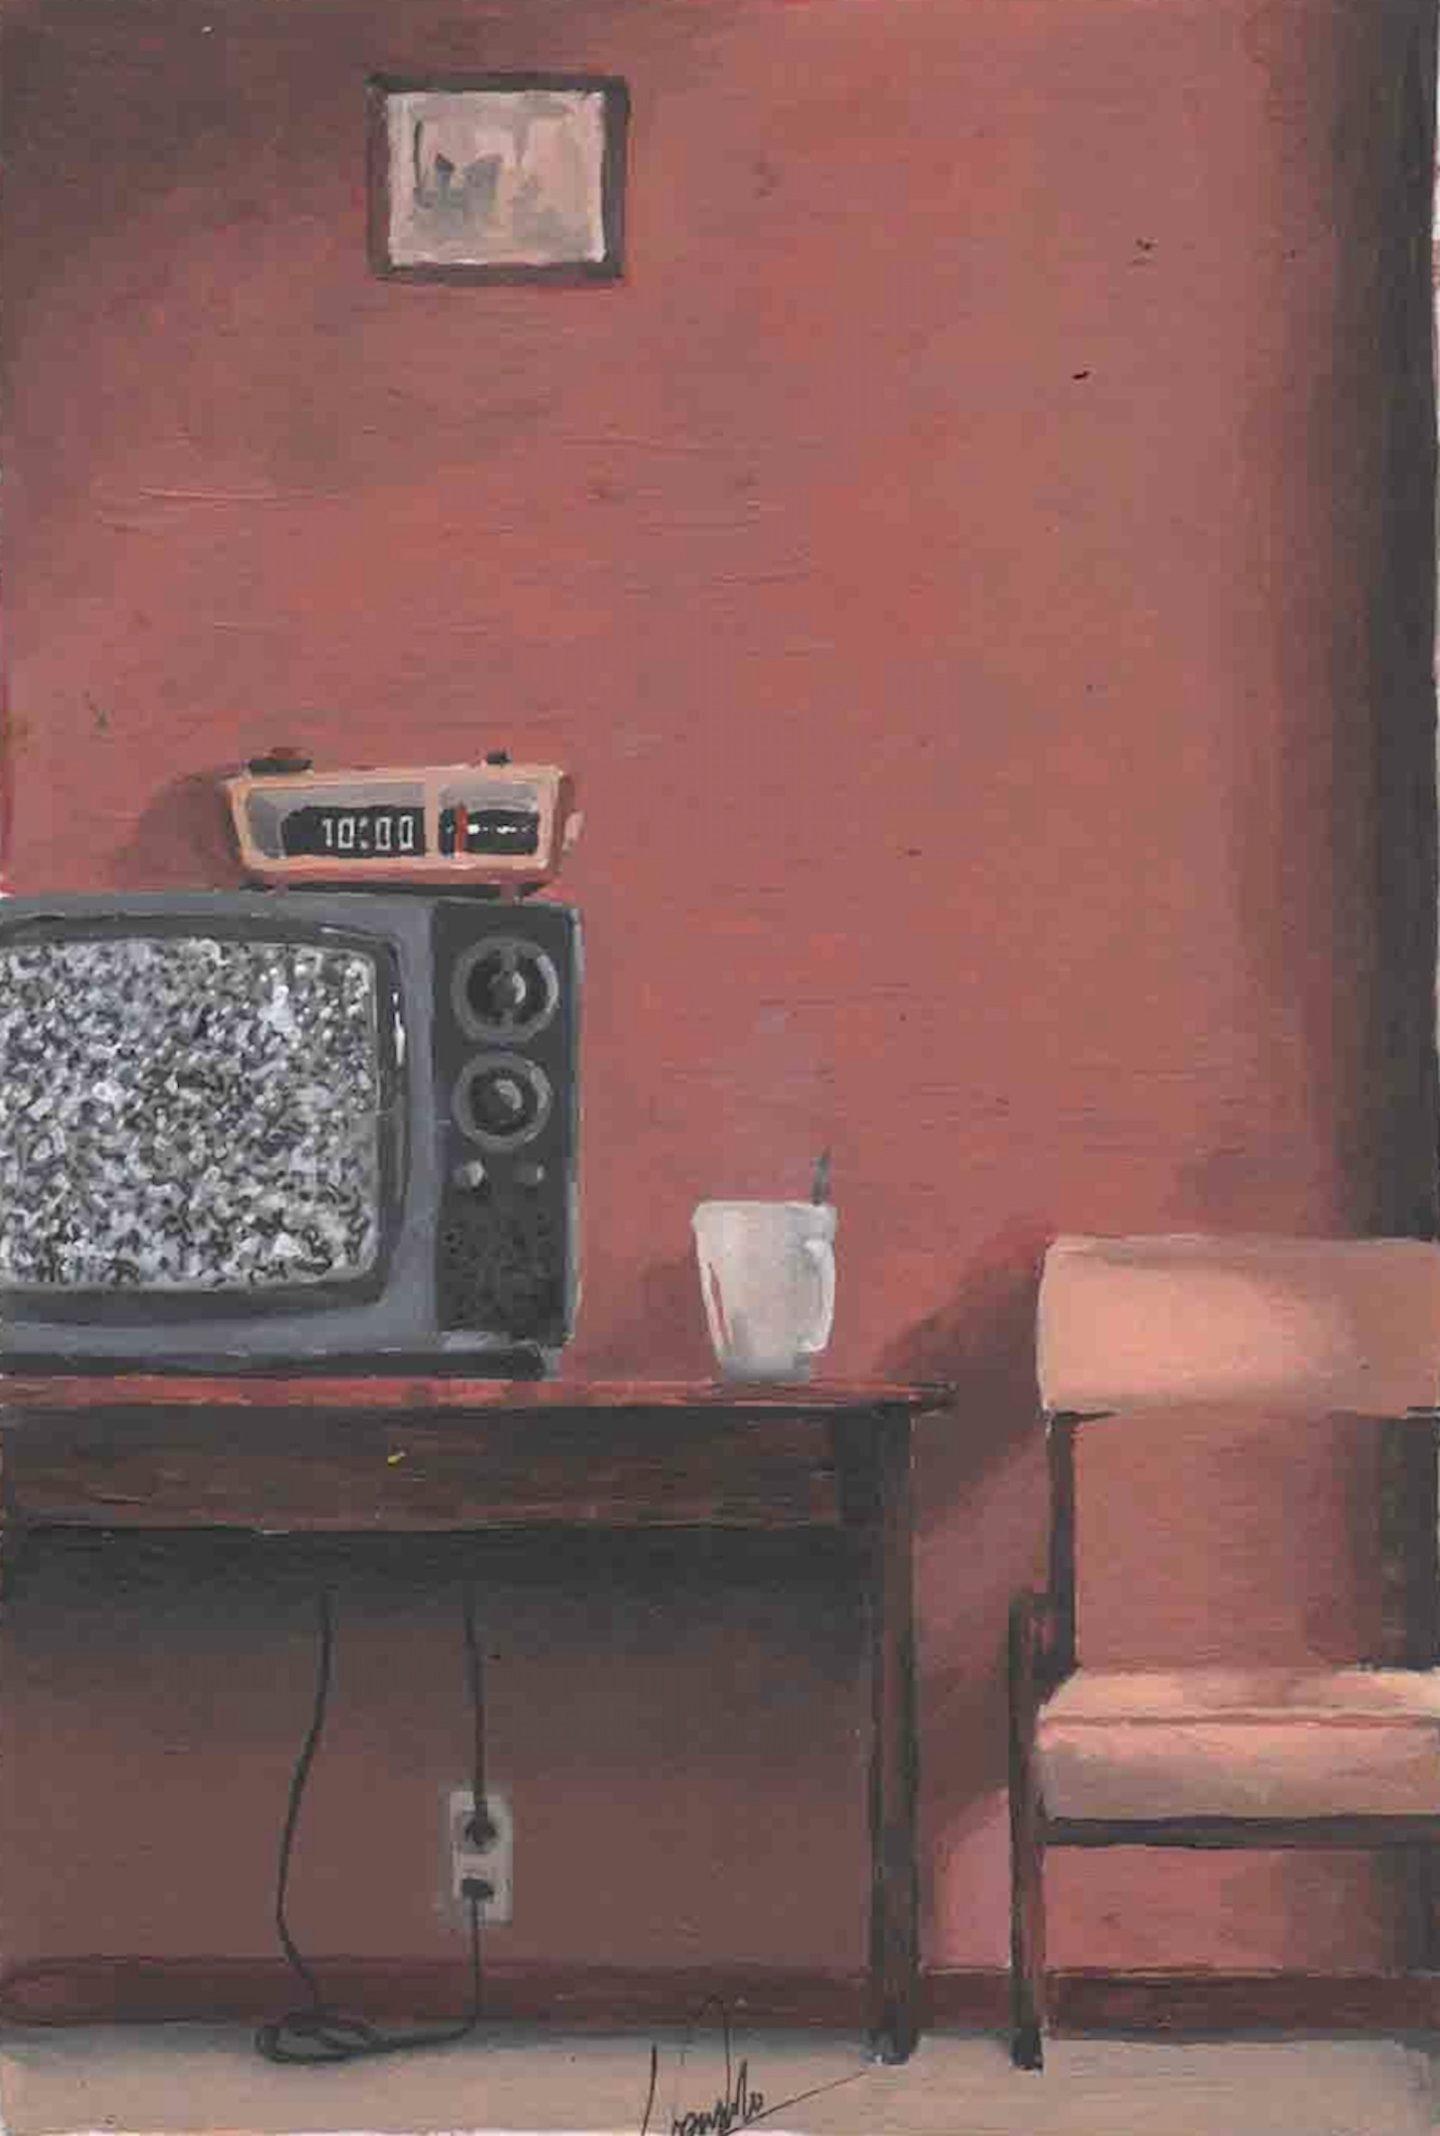 A painting of a table with a television, clock, a glass and a chair.